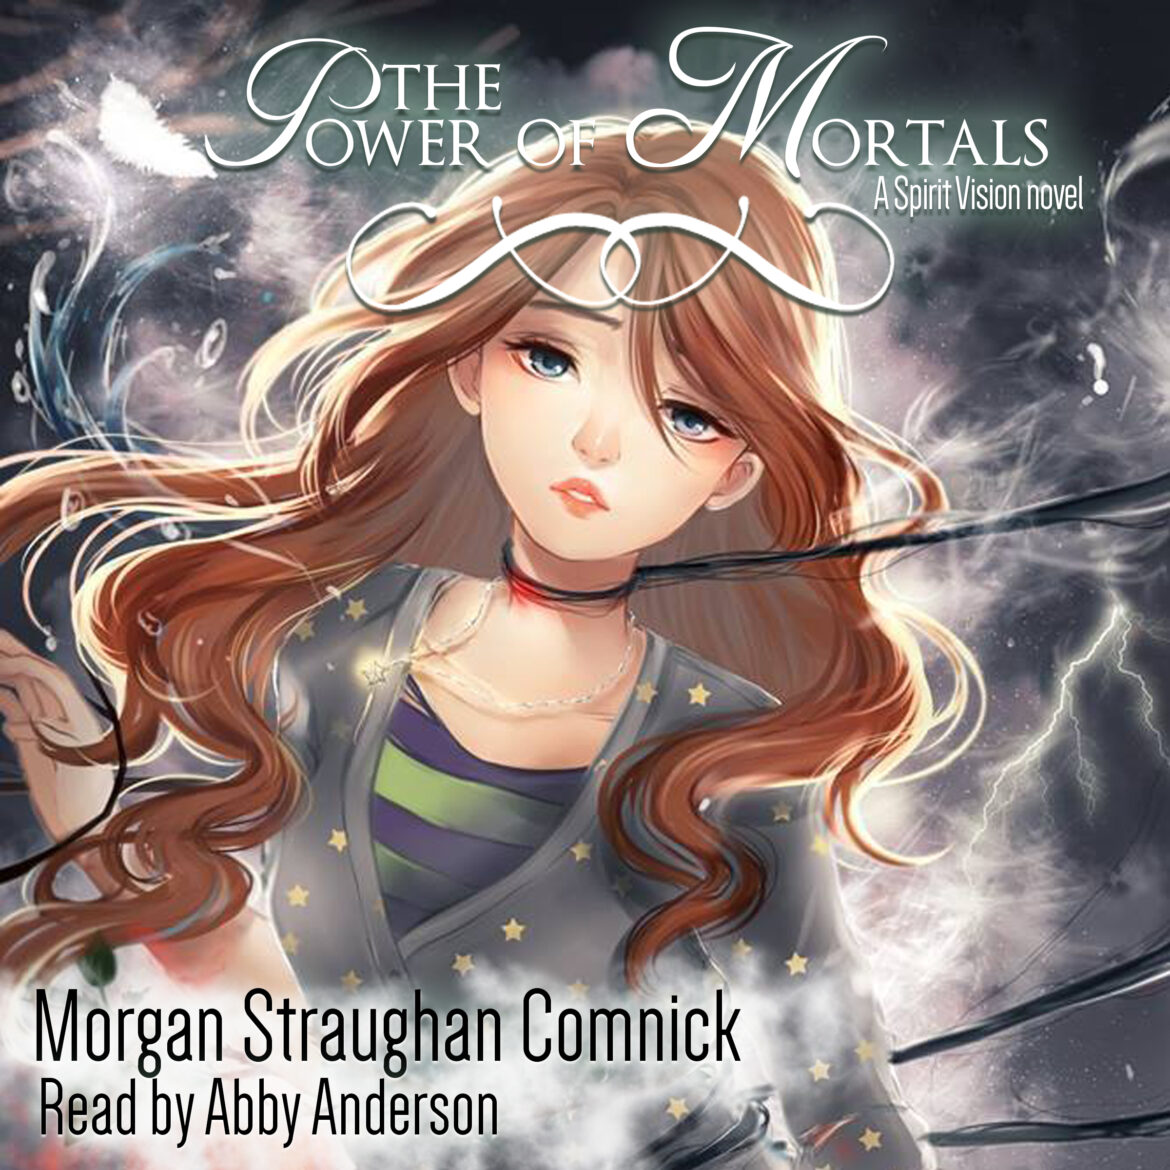 Release and Exclusive Sample of “Spirit Vision 3: The Power of Mortals” Audiobook!